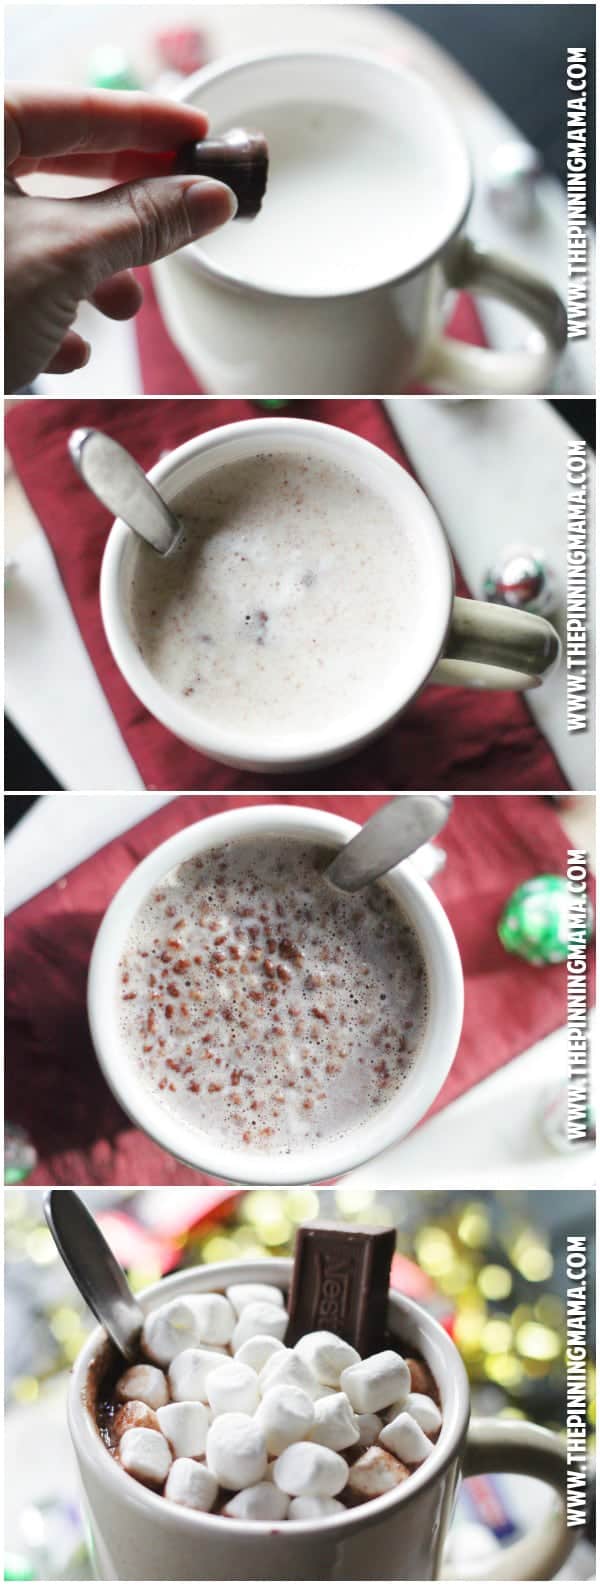 3 Nestle Crunch Hot Chocolate - This recipe is crazy easy and using real chocolate to make your hot cocoa is to die for!